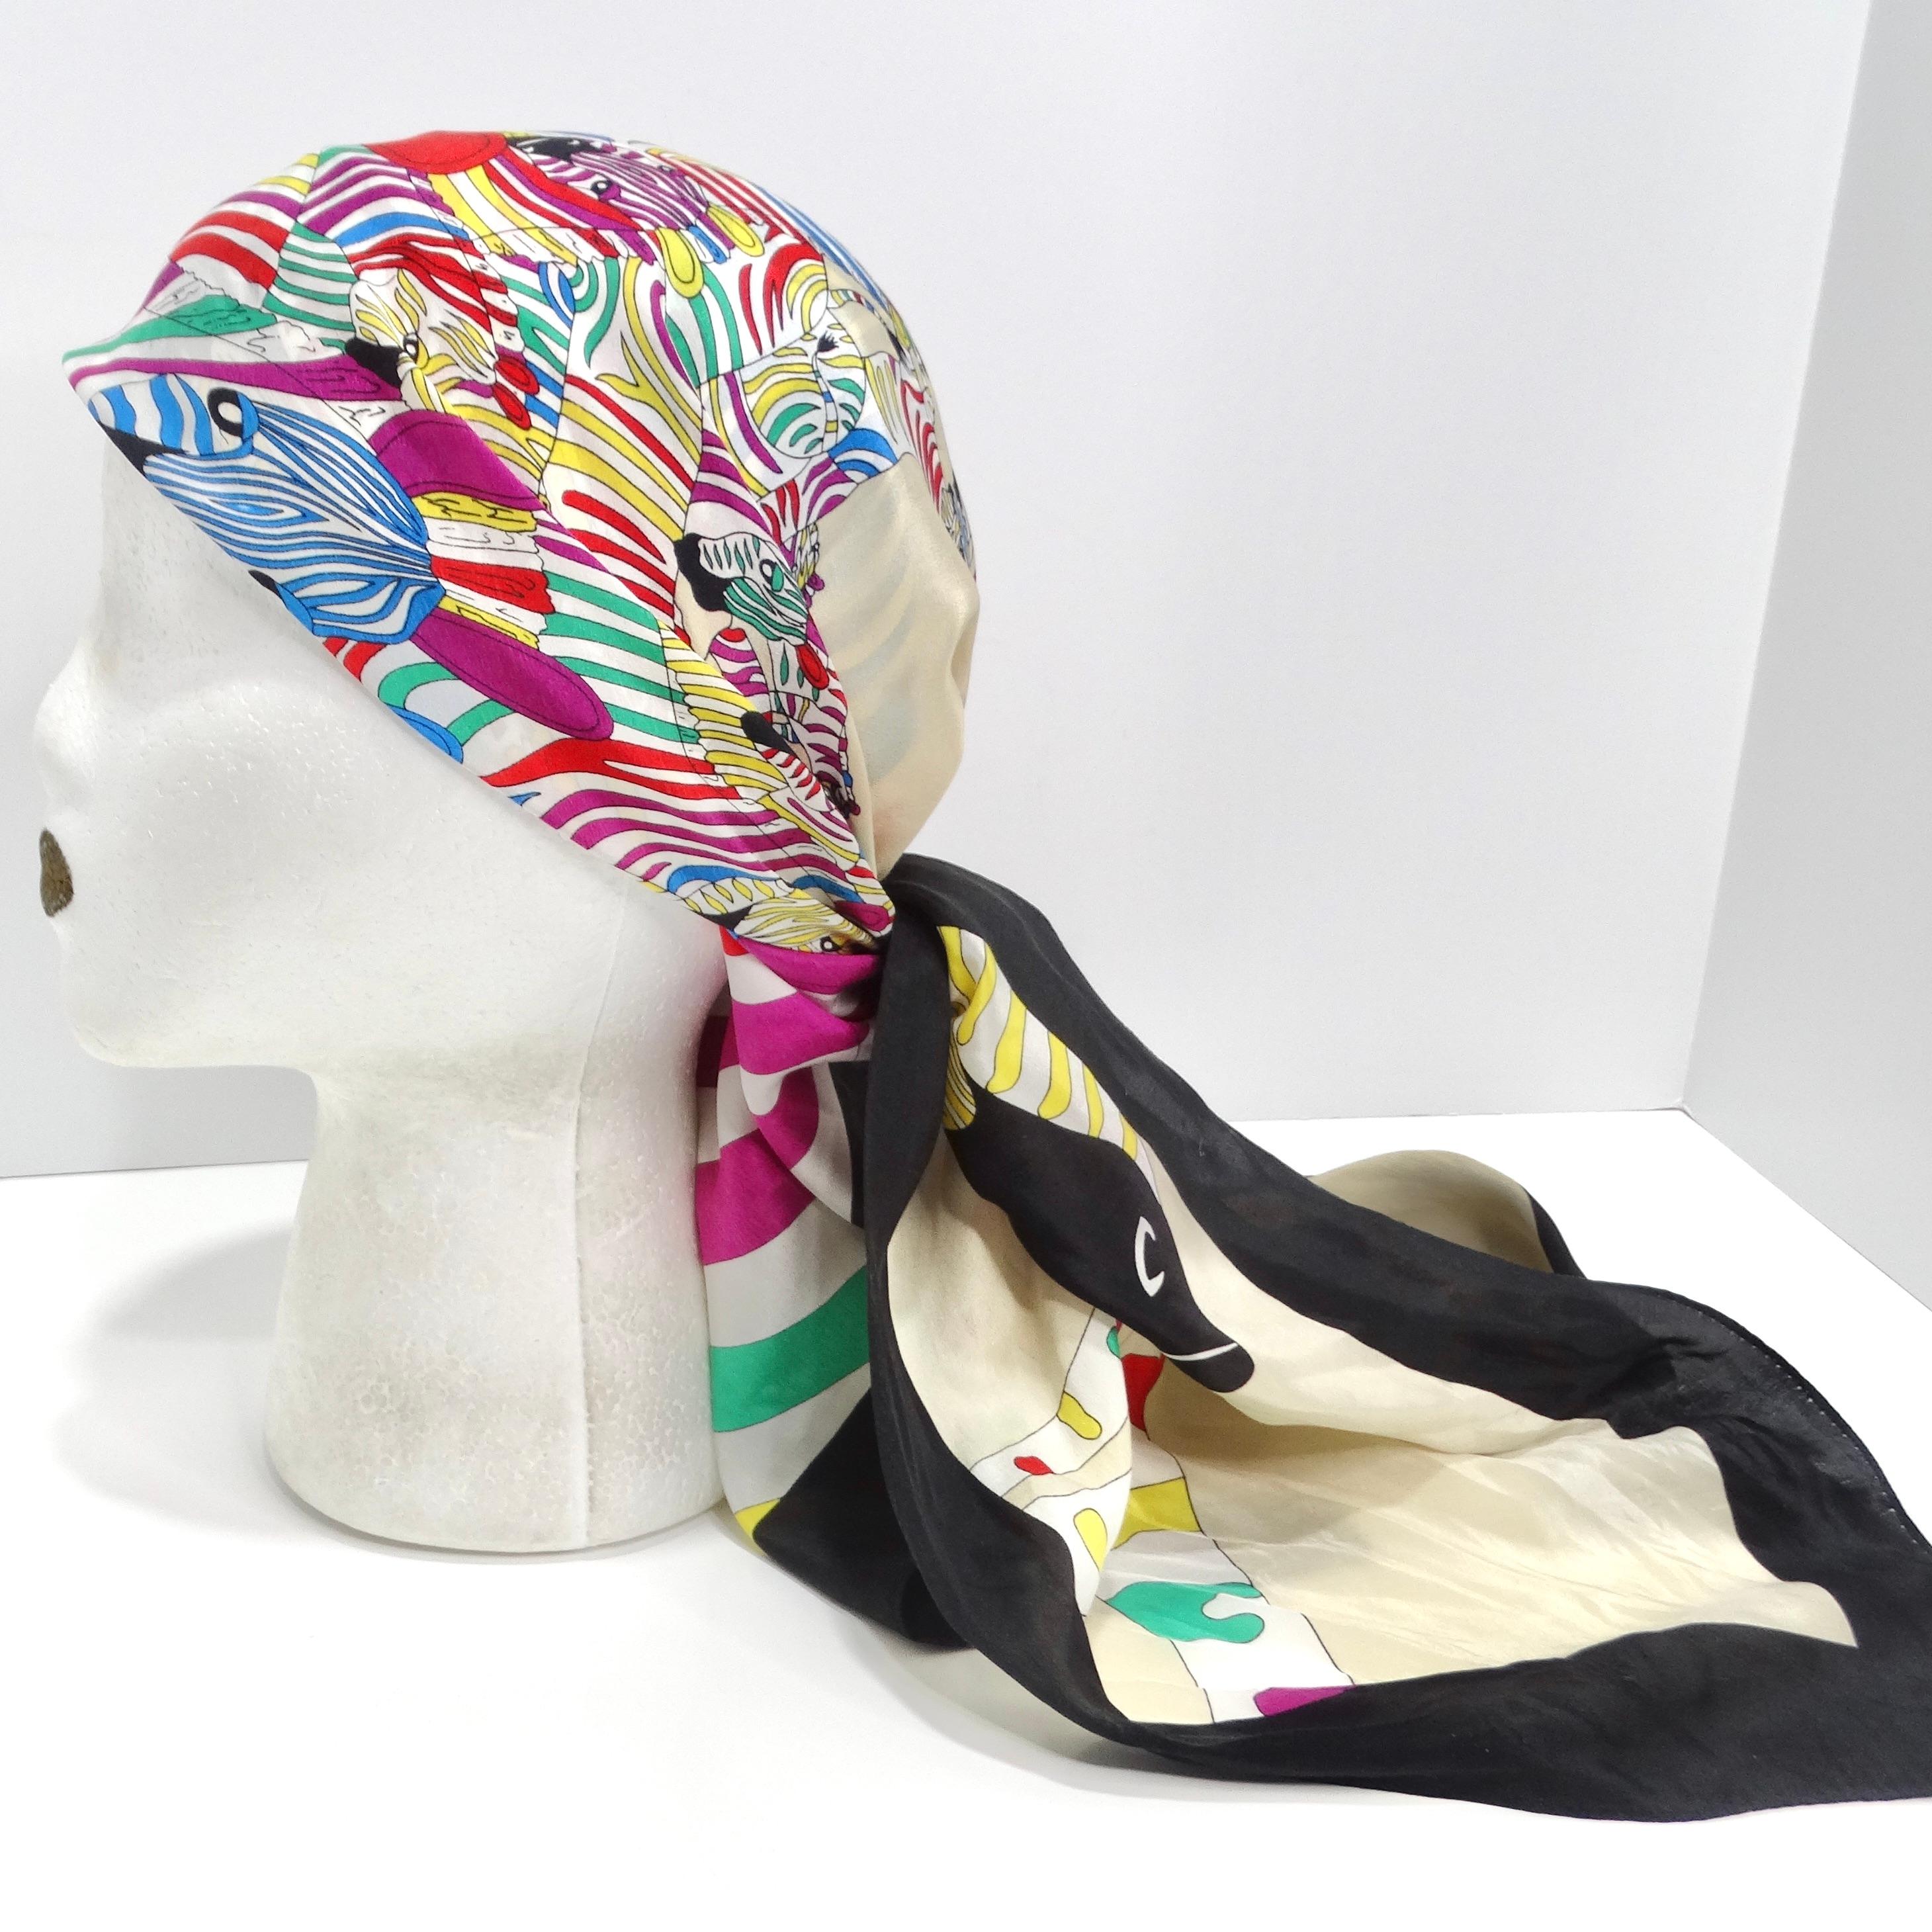 Introducing the 1980s Zebra Print Silk Scarf, a captivating and bold accessory that embodies the spirit of the 1980s with its vibrant design and eye-catching details. Crafted from luxurious ivory silk, this scarf features a striking zebra print